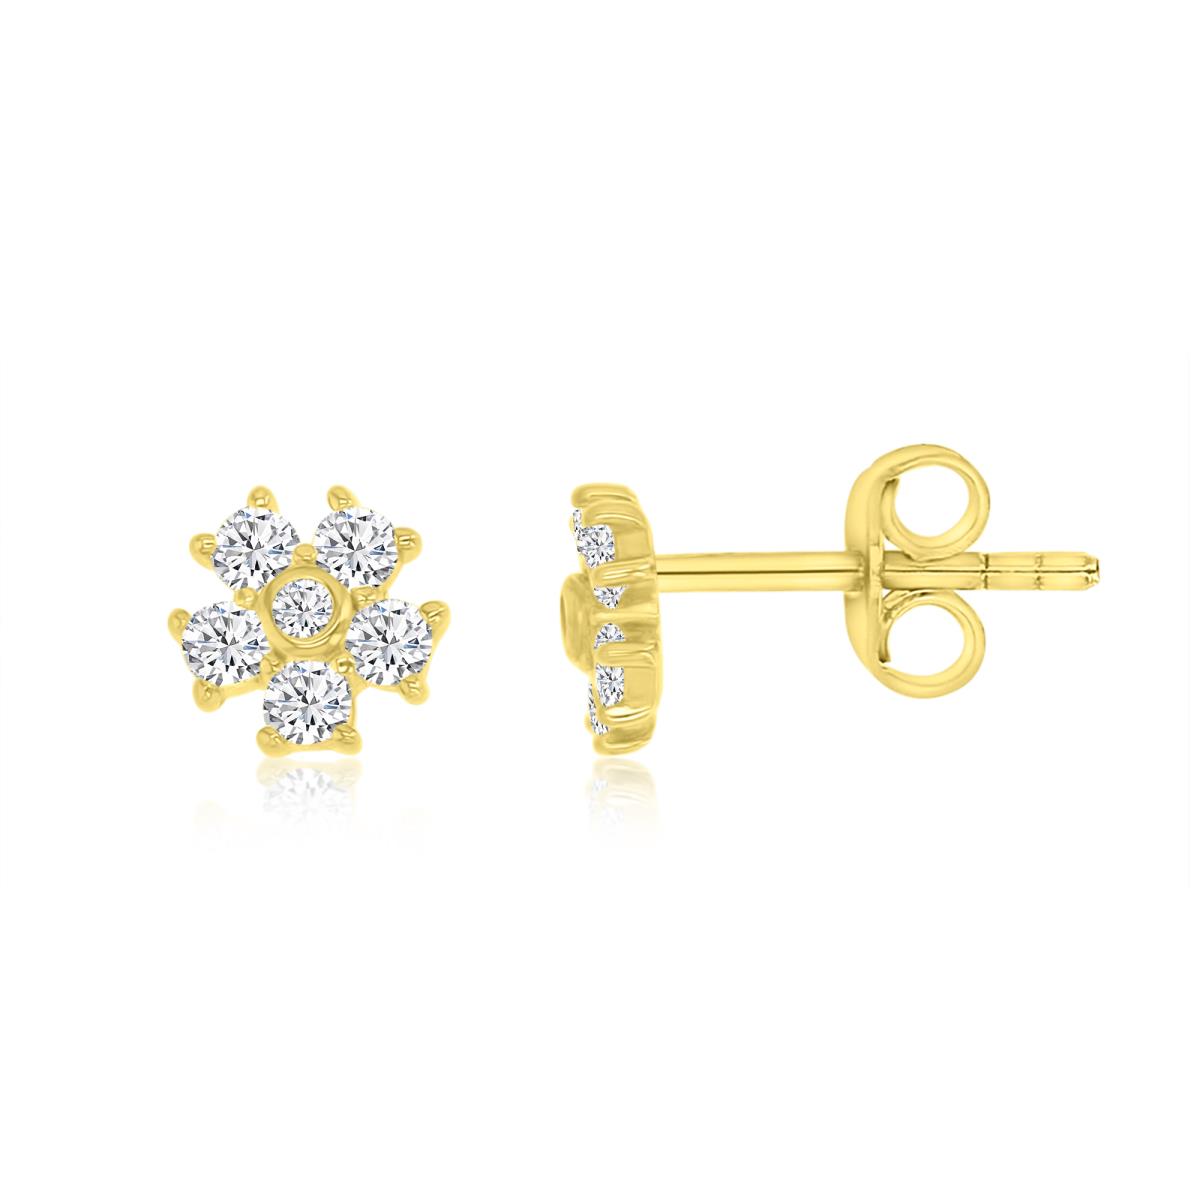 Sterling Silver Yellow 6MM Polished White CZ Flower Stud Earrings